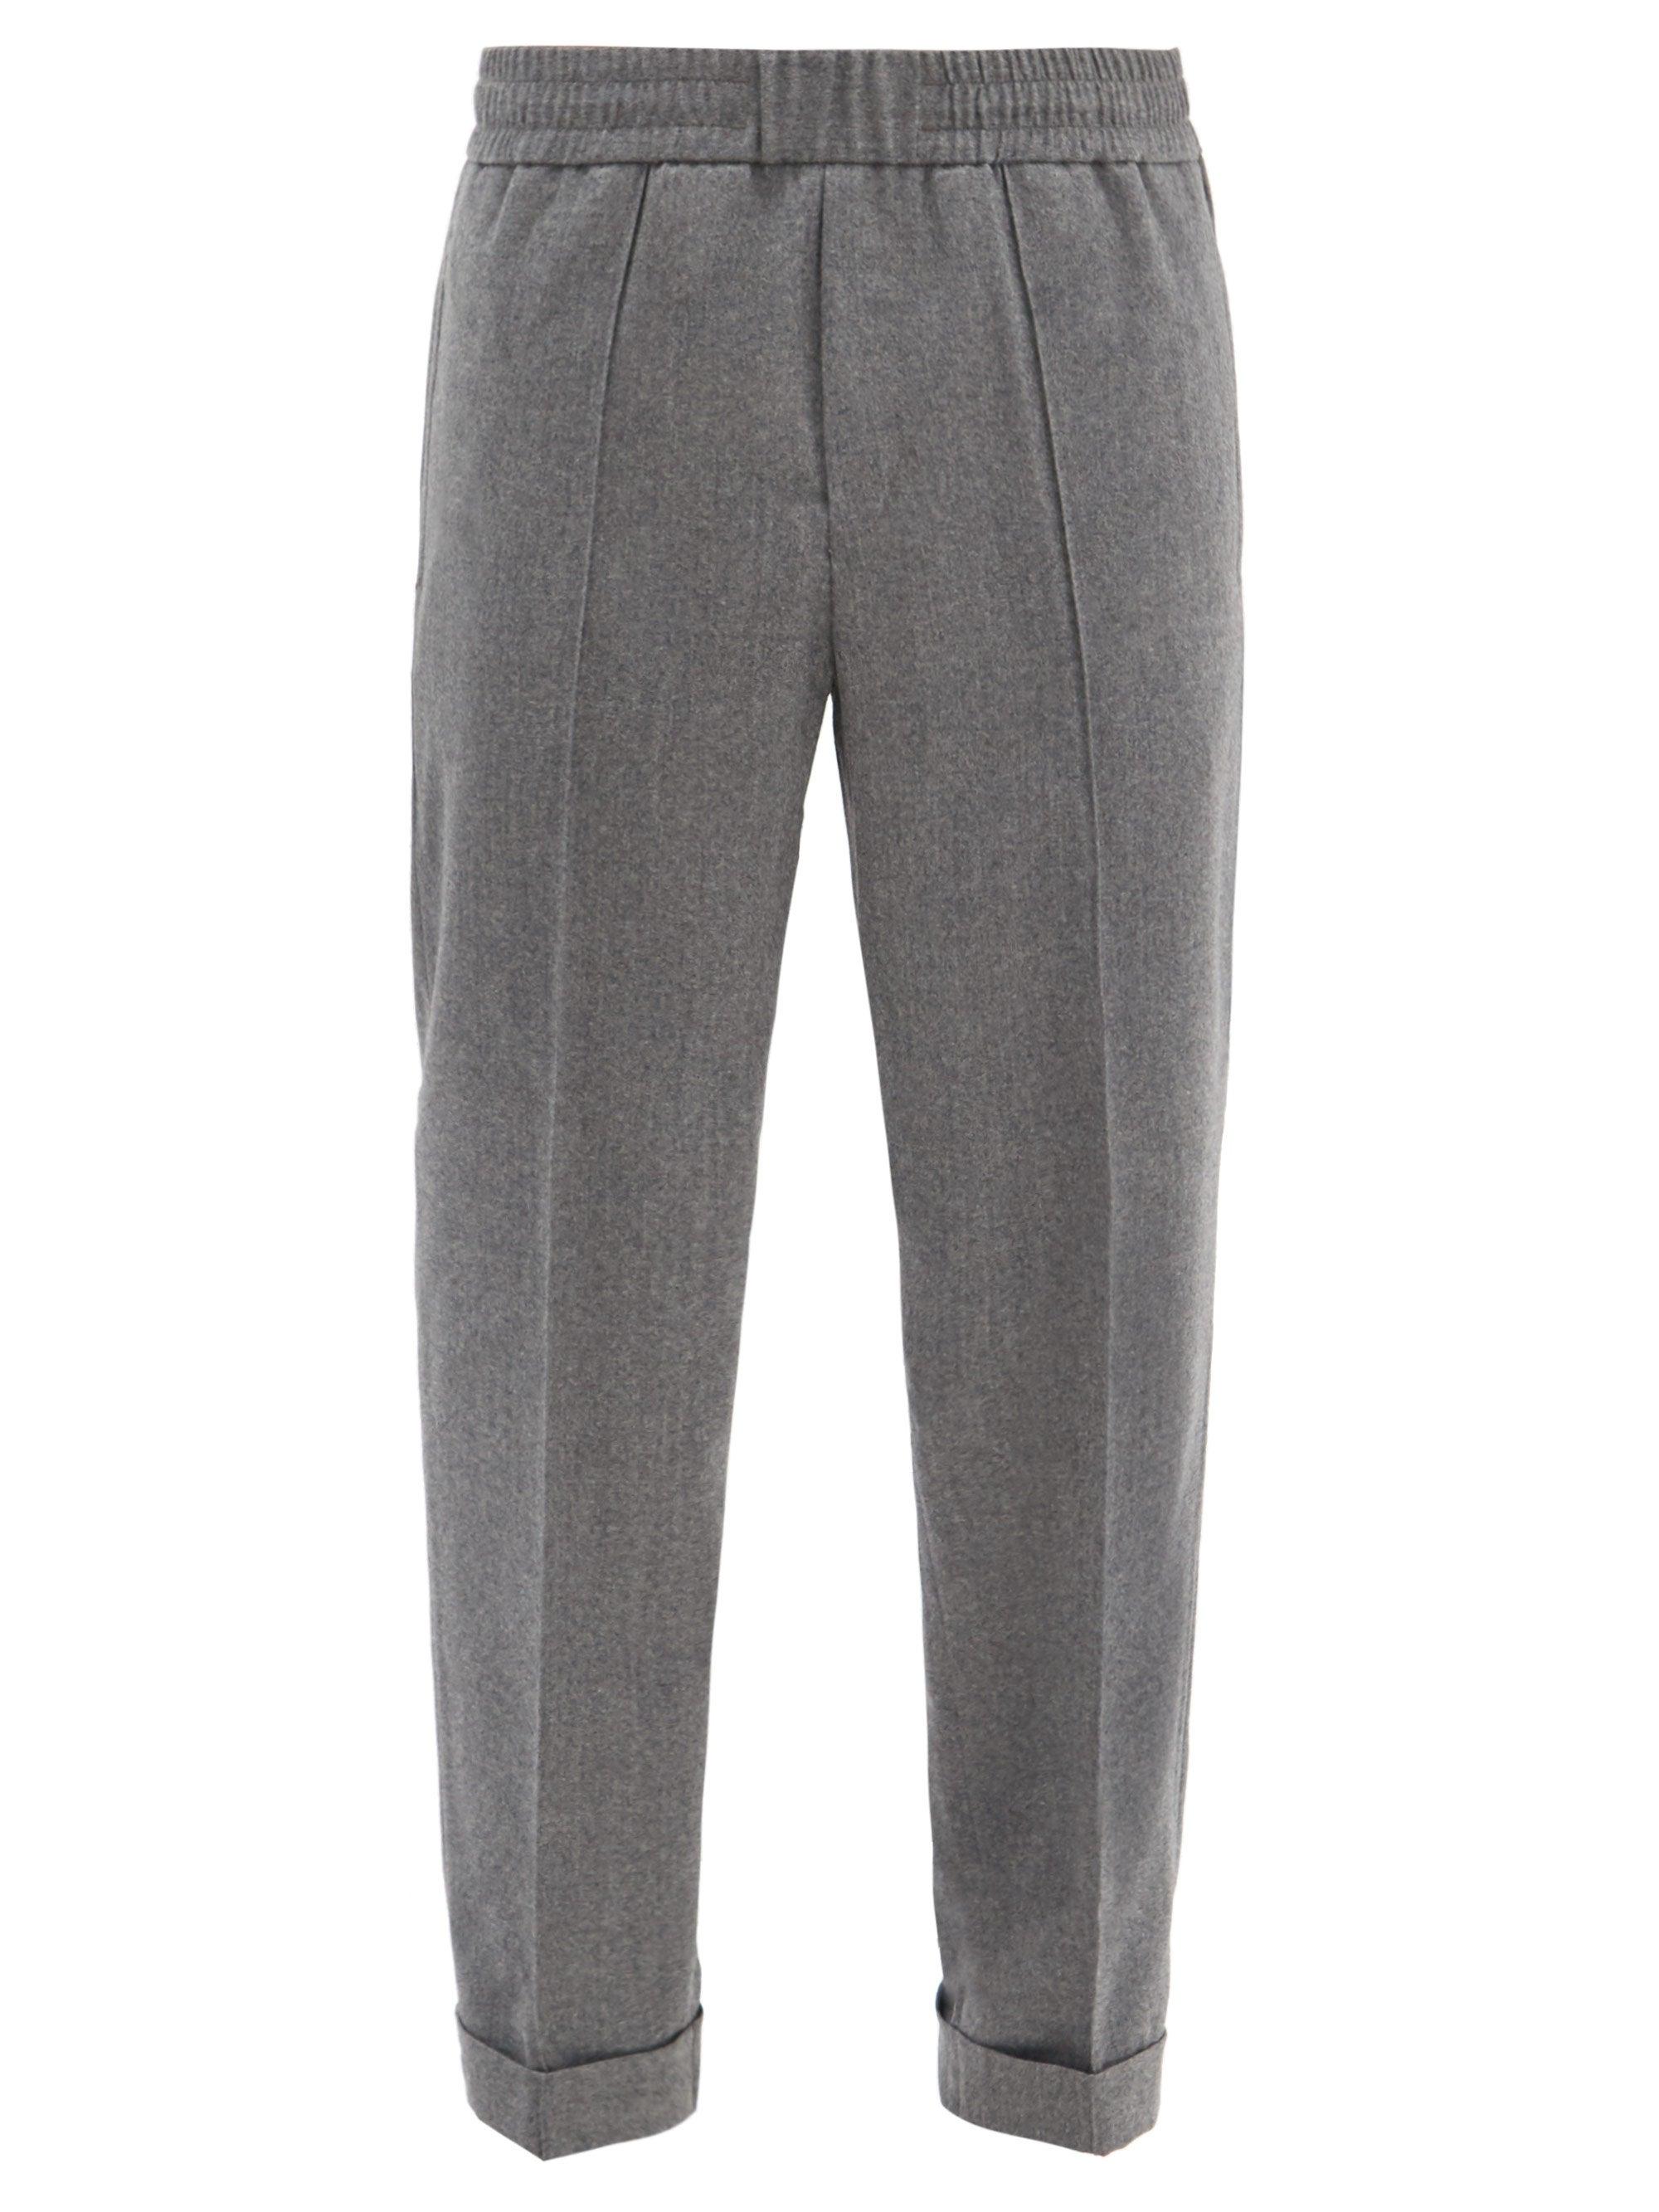 Moncler Pleated Wool Track Pants in Gray for Men - Lyst